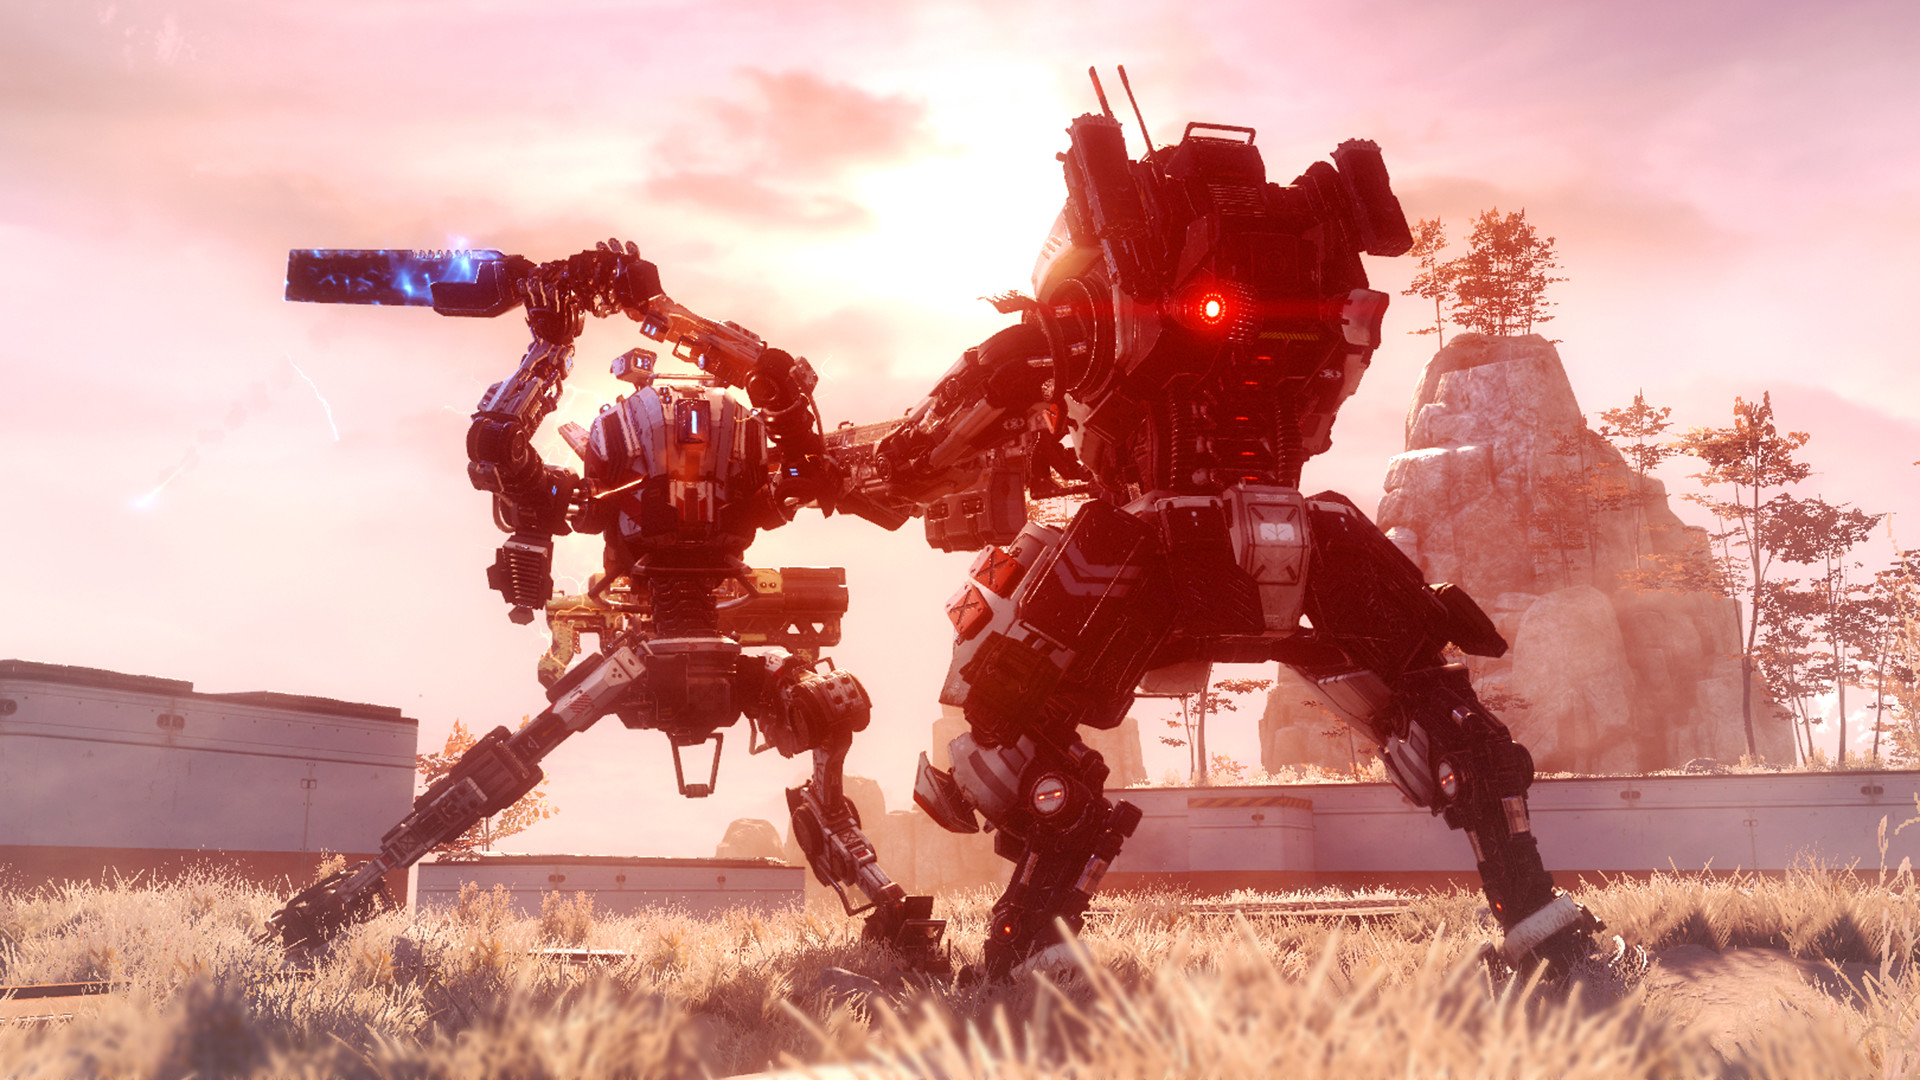 EA reportedly cancels unannounced Titanfall single-player game